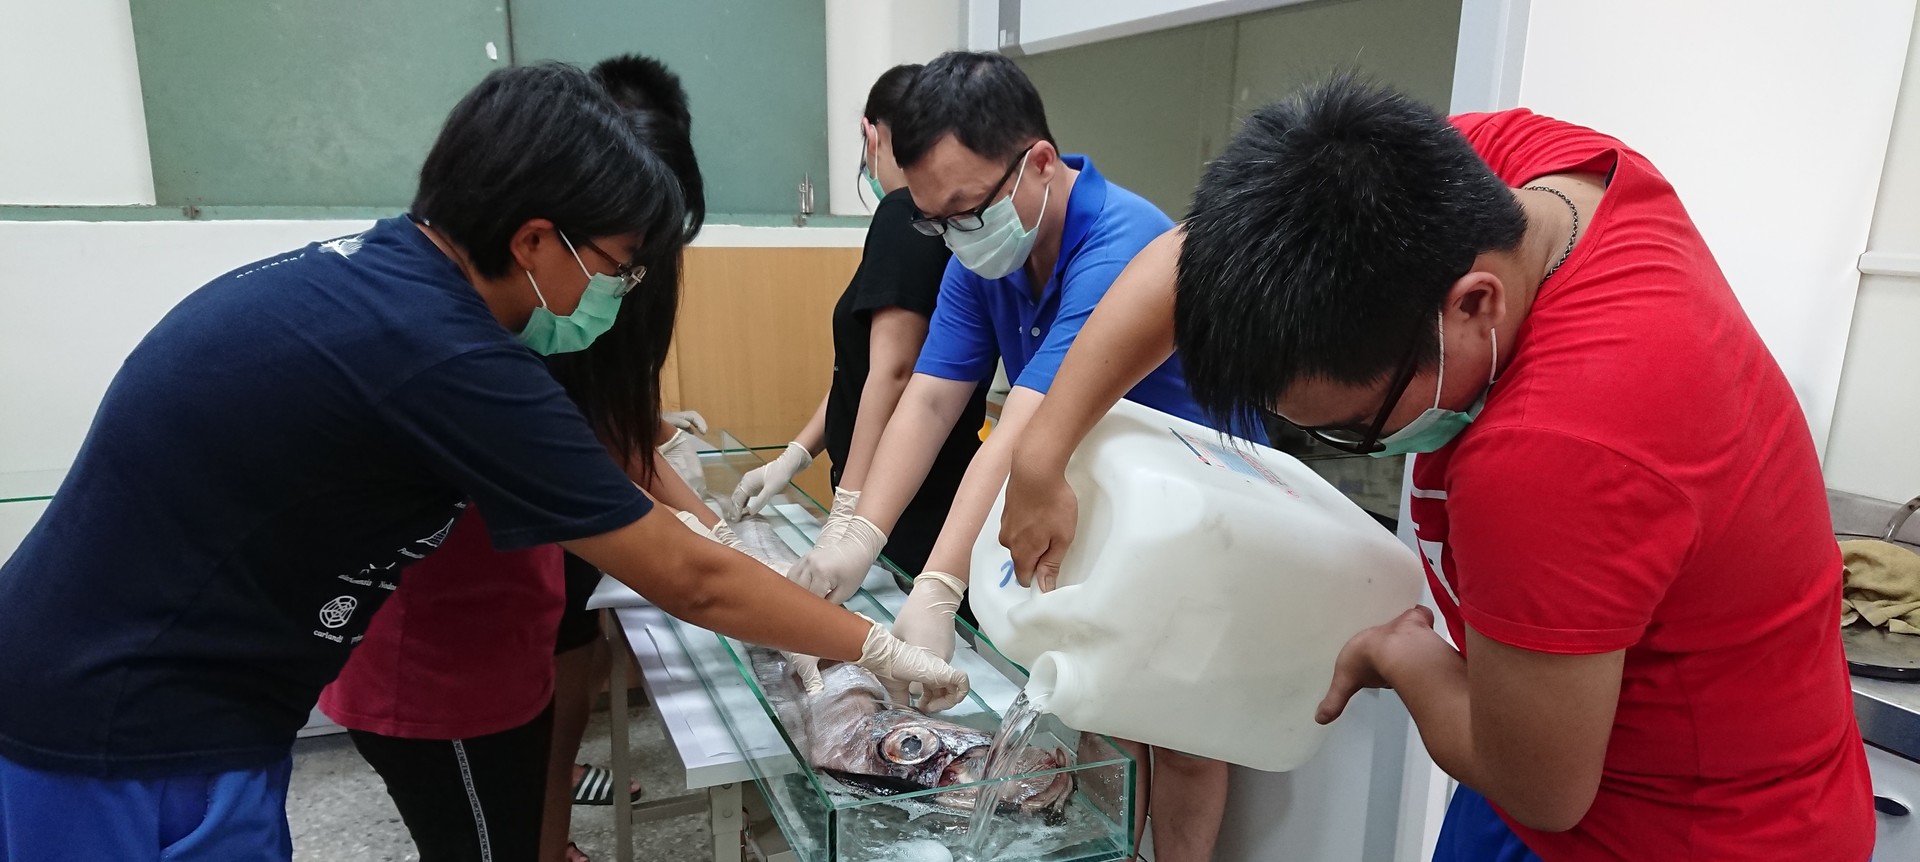 Students replace the preservation fluid under the guidance of Associate Professor Te-Yu Liao.